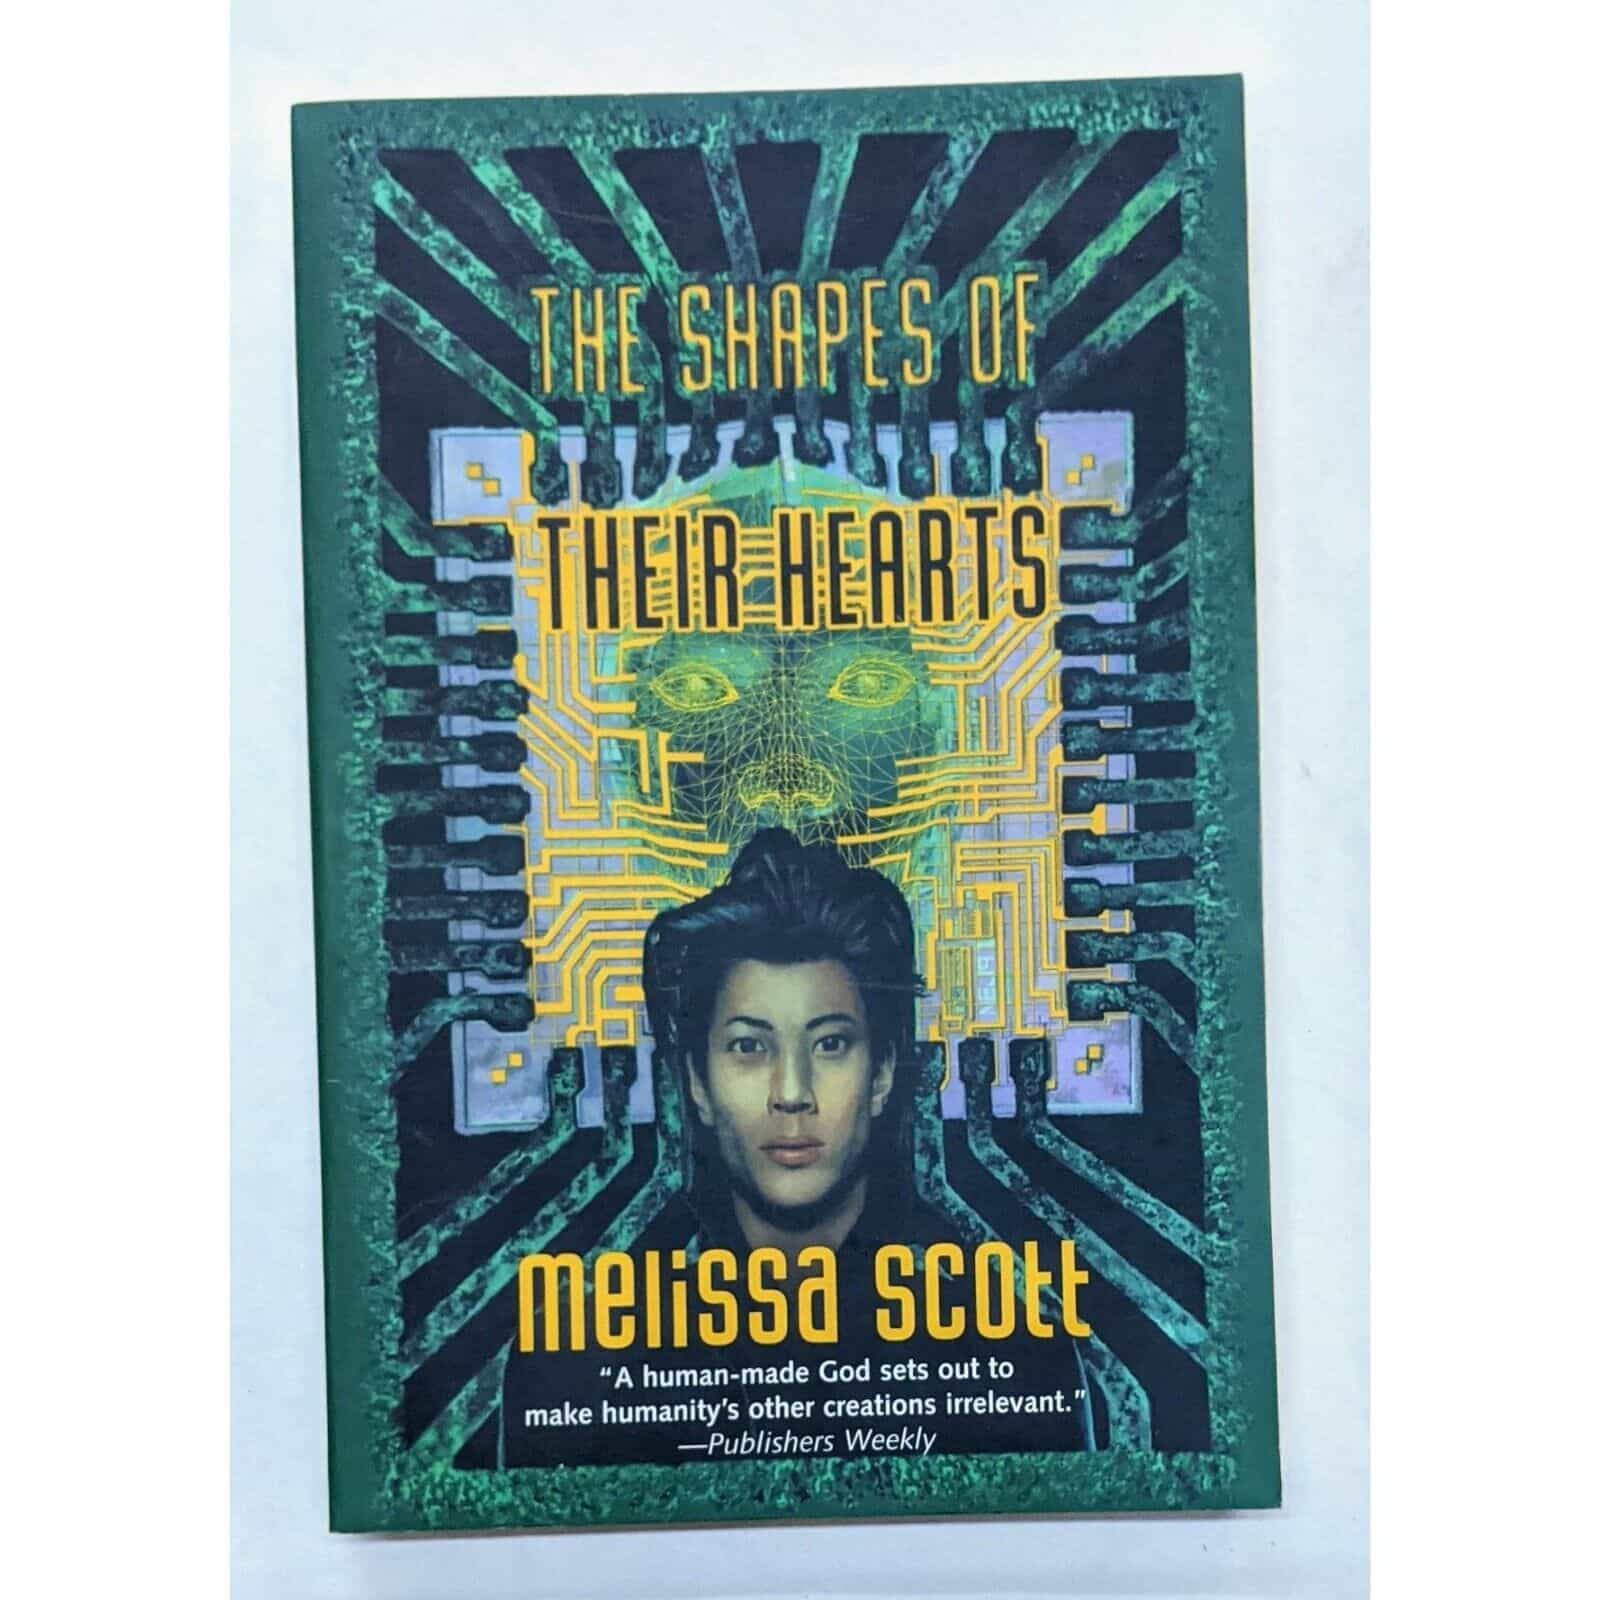 The Shapes of Their Hearts by Melissa Scott Book